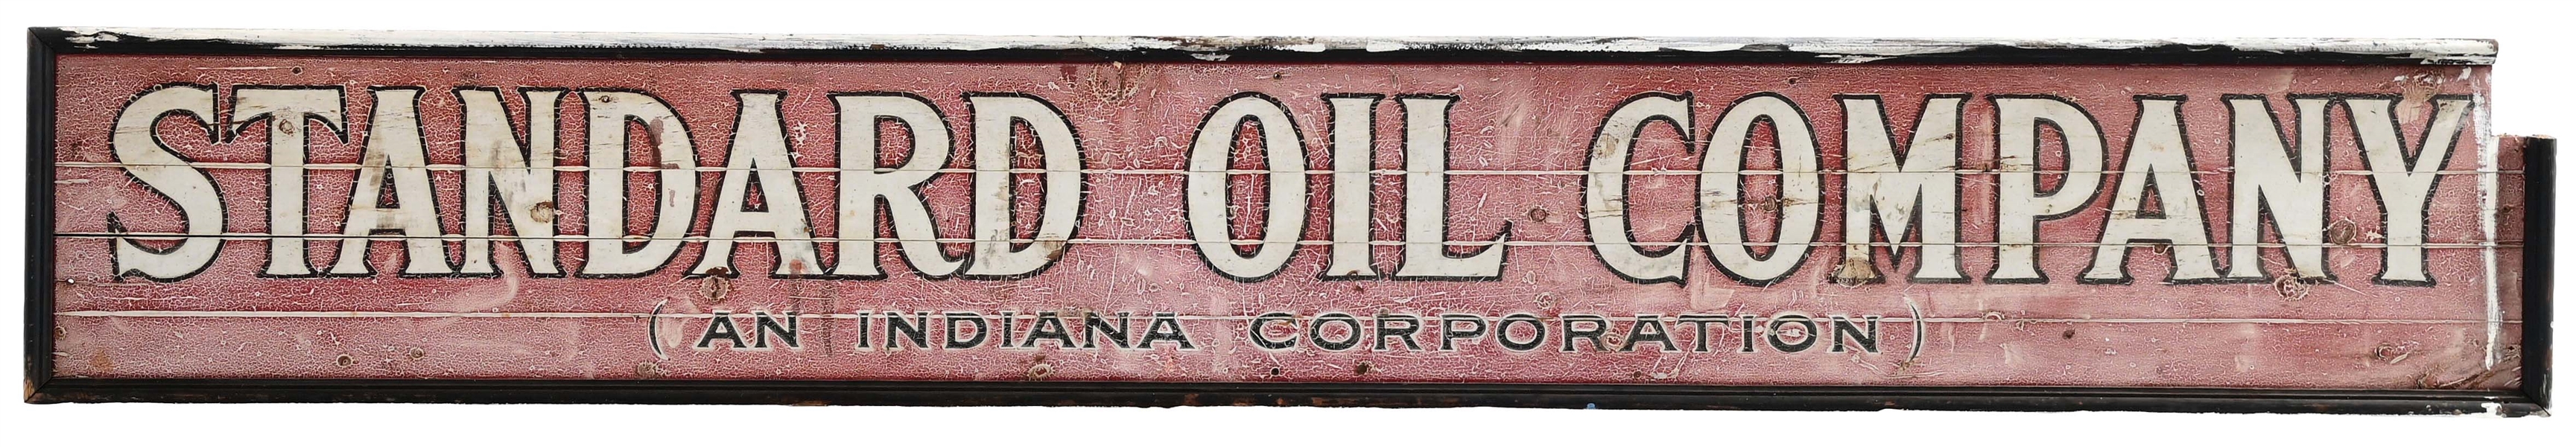 STANDARD OIL COMPANY OF INDIANA PAINTED WOOD SIGN.